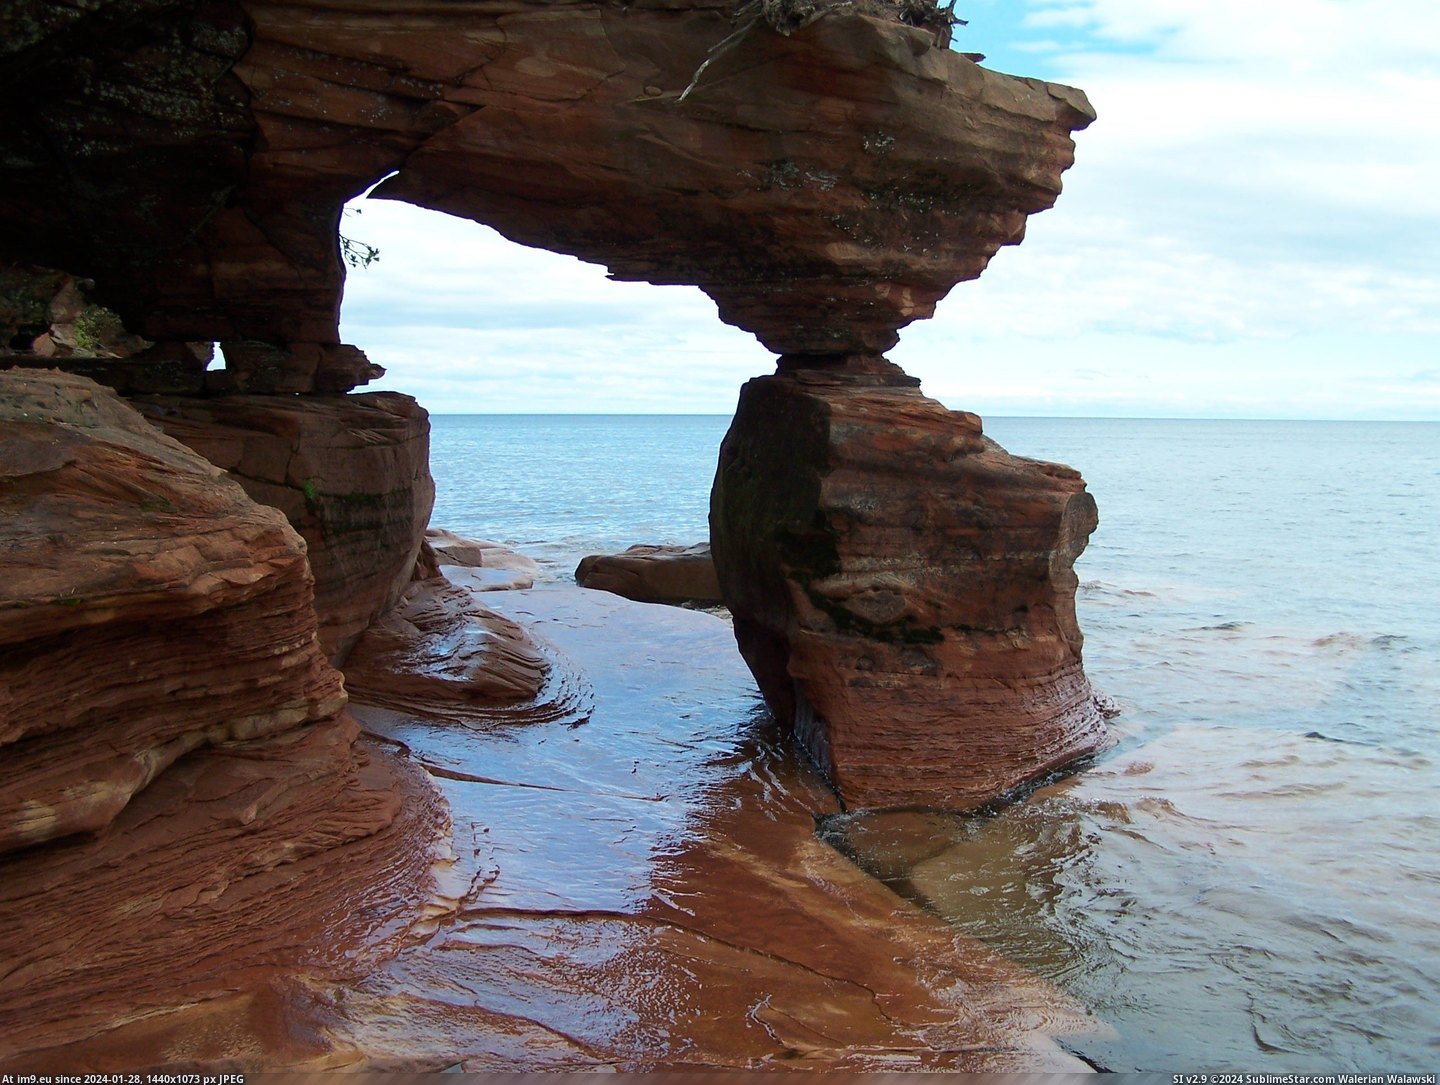 #National #Island #Sea #Wisconsin #Apostle #Lakeshore #2500x1900 #Sand #Islands #Arch [Earthporn] Sea Arch on Sand Island, Apostle Islands National Lakeshore, Wisconsin [2500X1900] [OC] Pic. (Image of album My r/EARTHPORN favs))